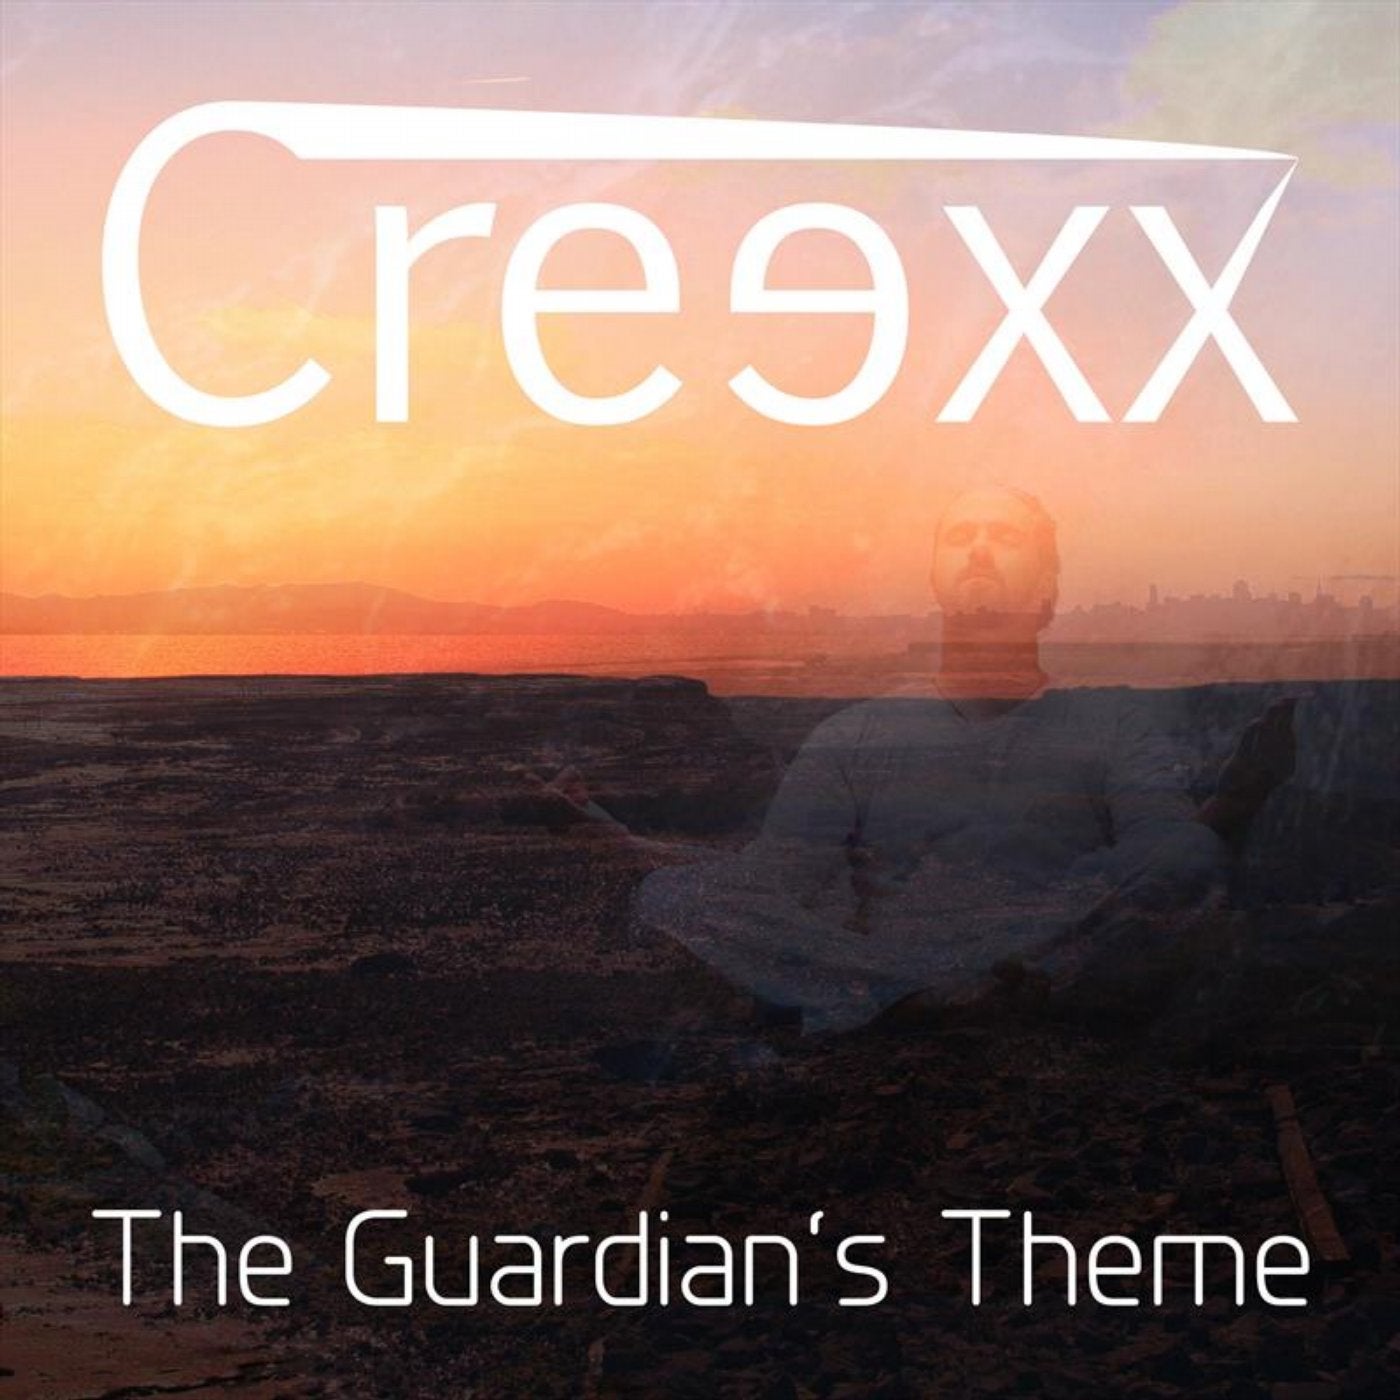 The Guardian's Theme